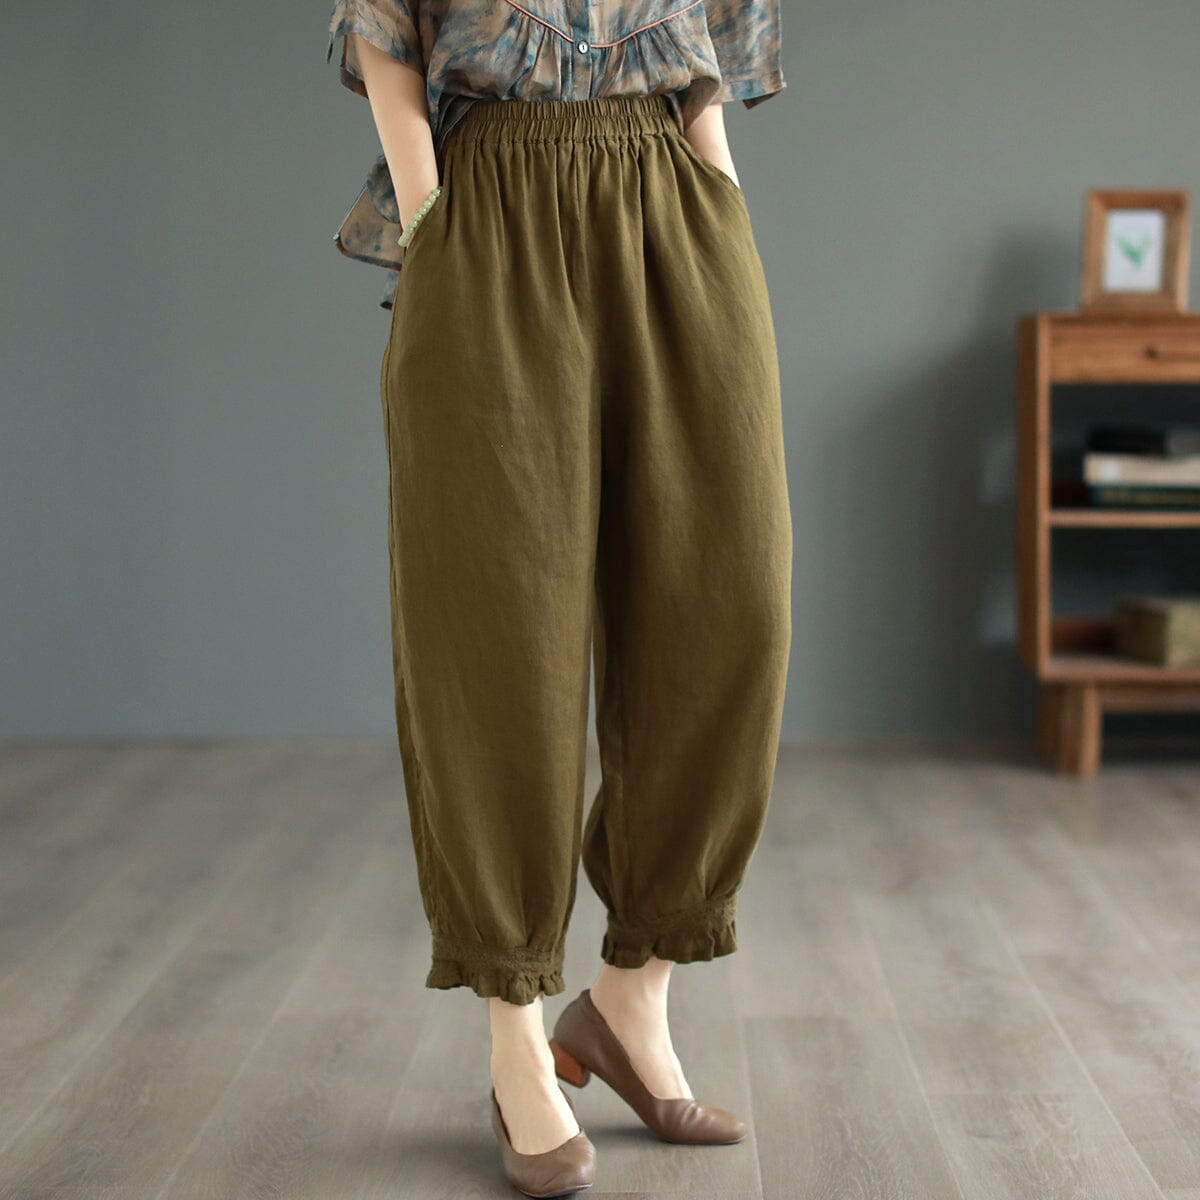 Spring Summer Casual Loose Linen Trim Pants May 2023 New Arrival One Size Dark Khaki 